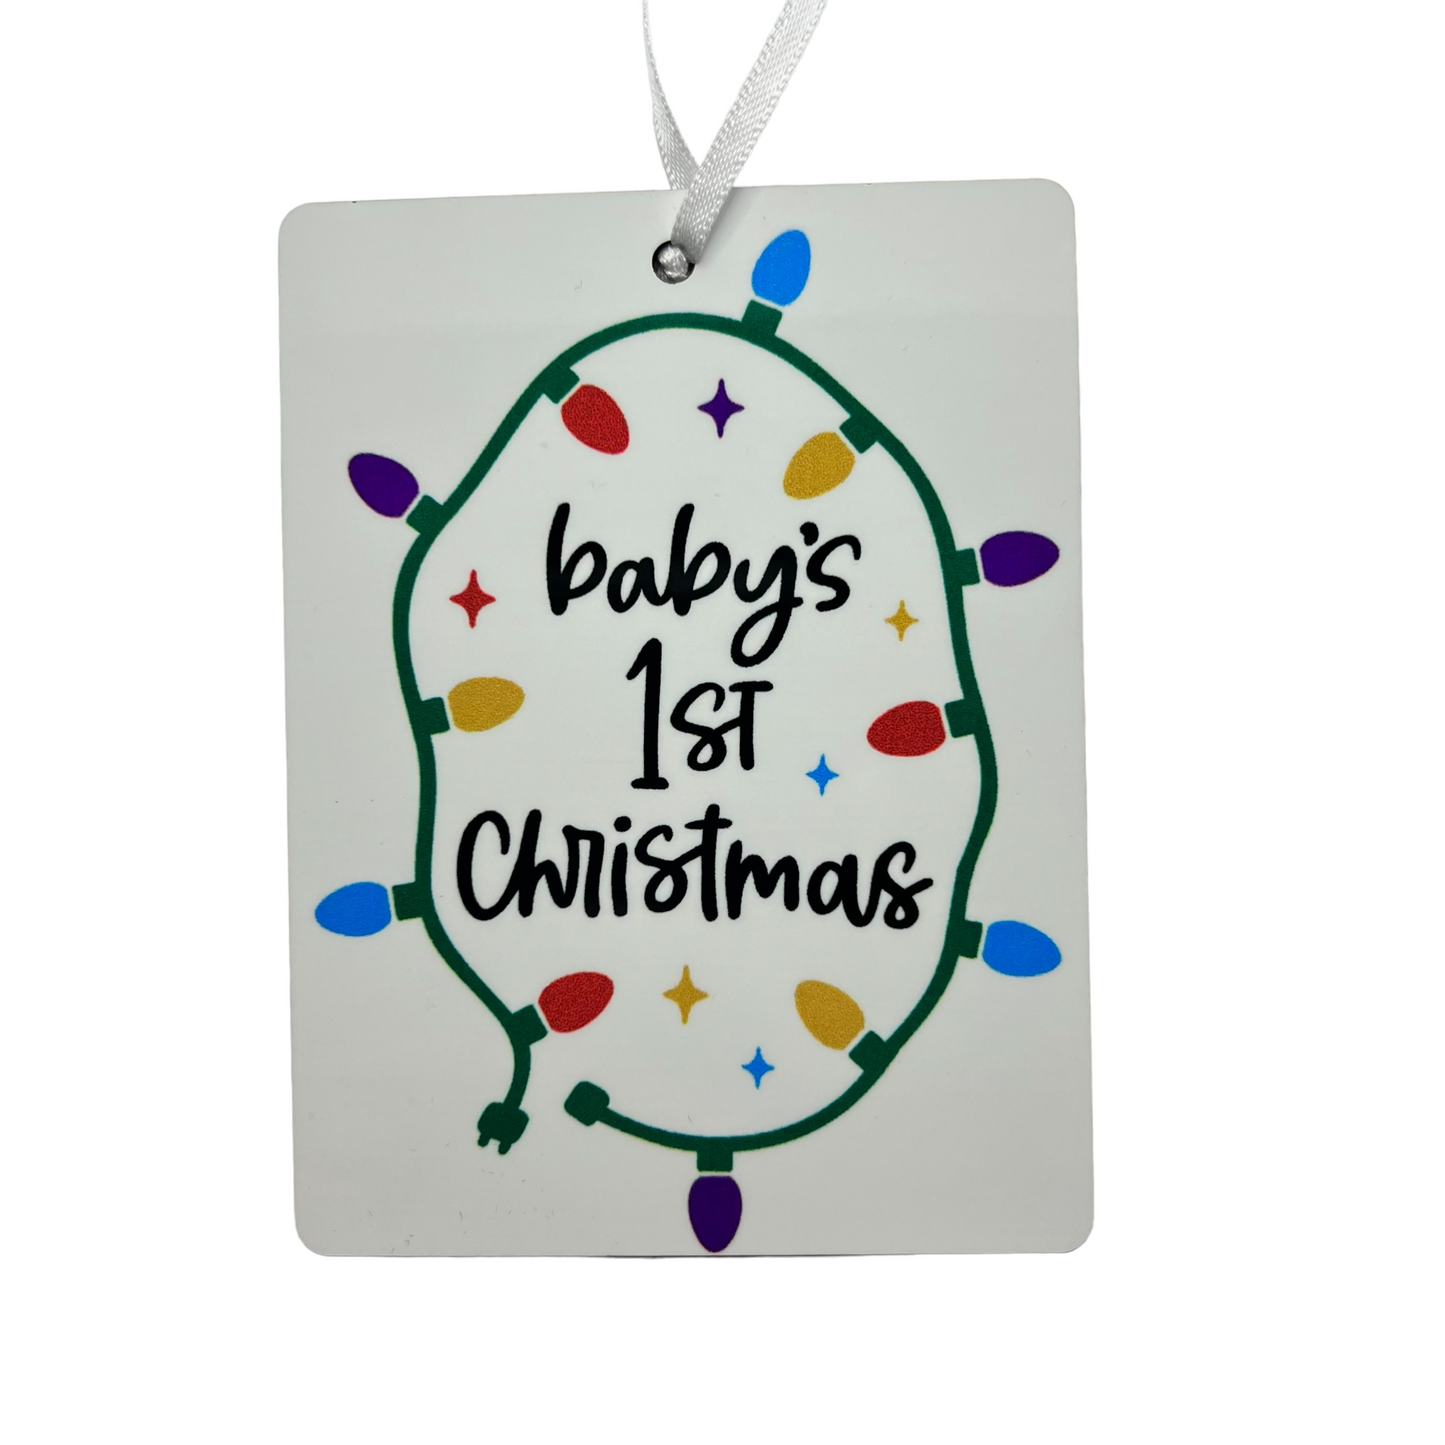 JenDore Handmade "Baby's 1st Christmas" Wooden Christmas Holiday Ornament